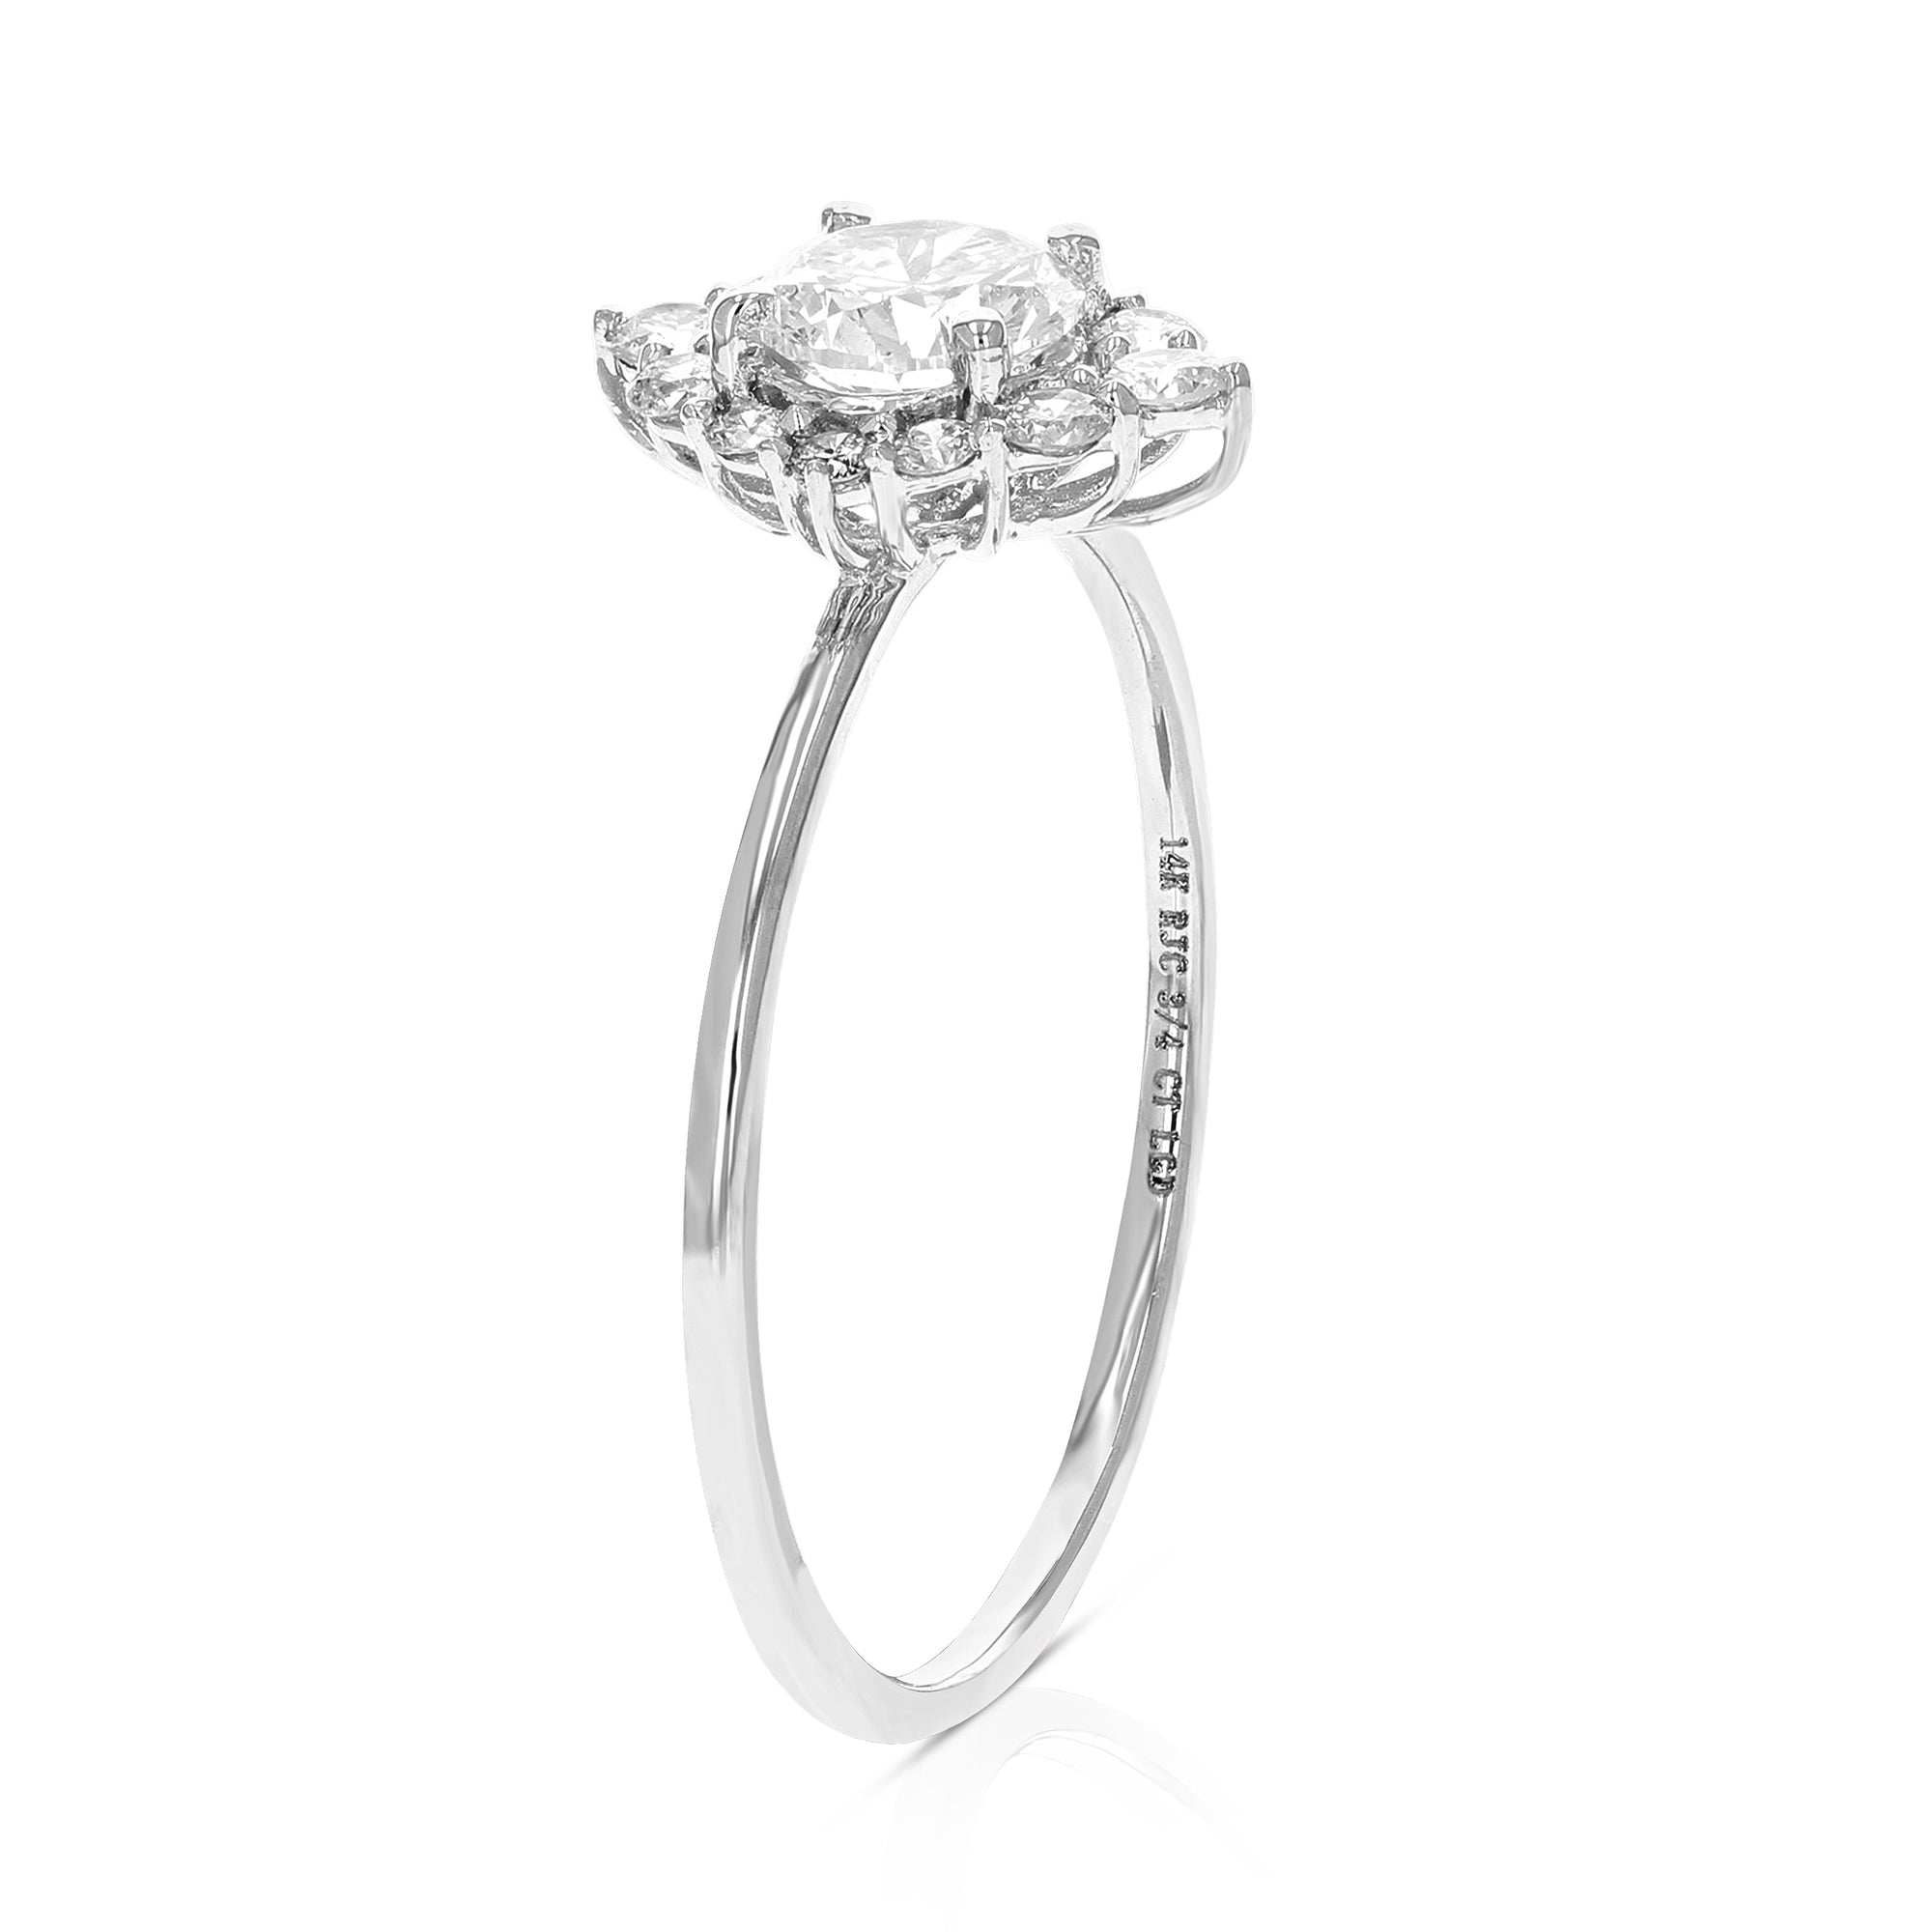 3/4 cttw Wedding Engagement Ring for Women, Round Lab Grown Diamond Ring in 14K White Gold, Prong Setting